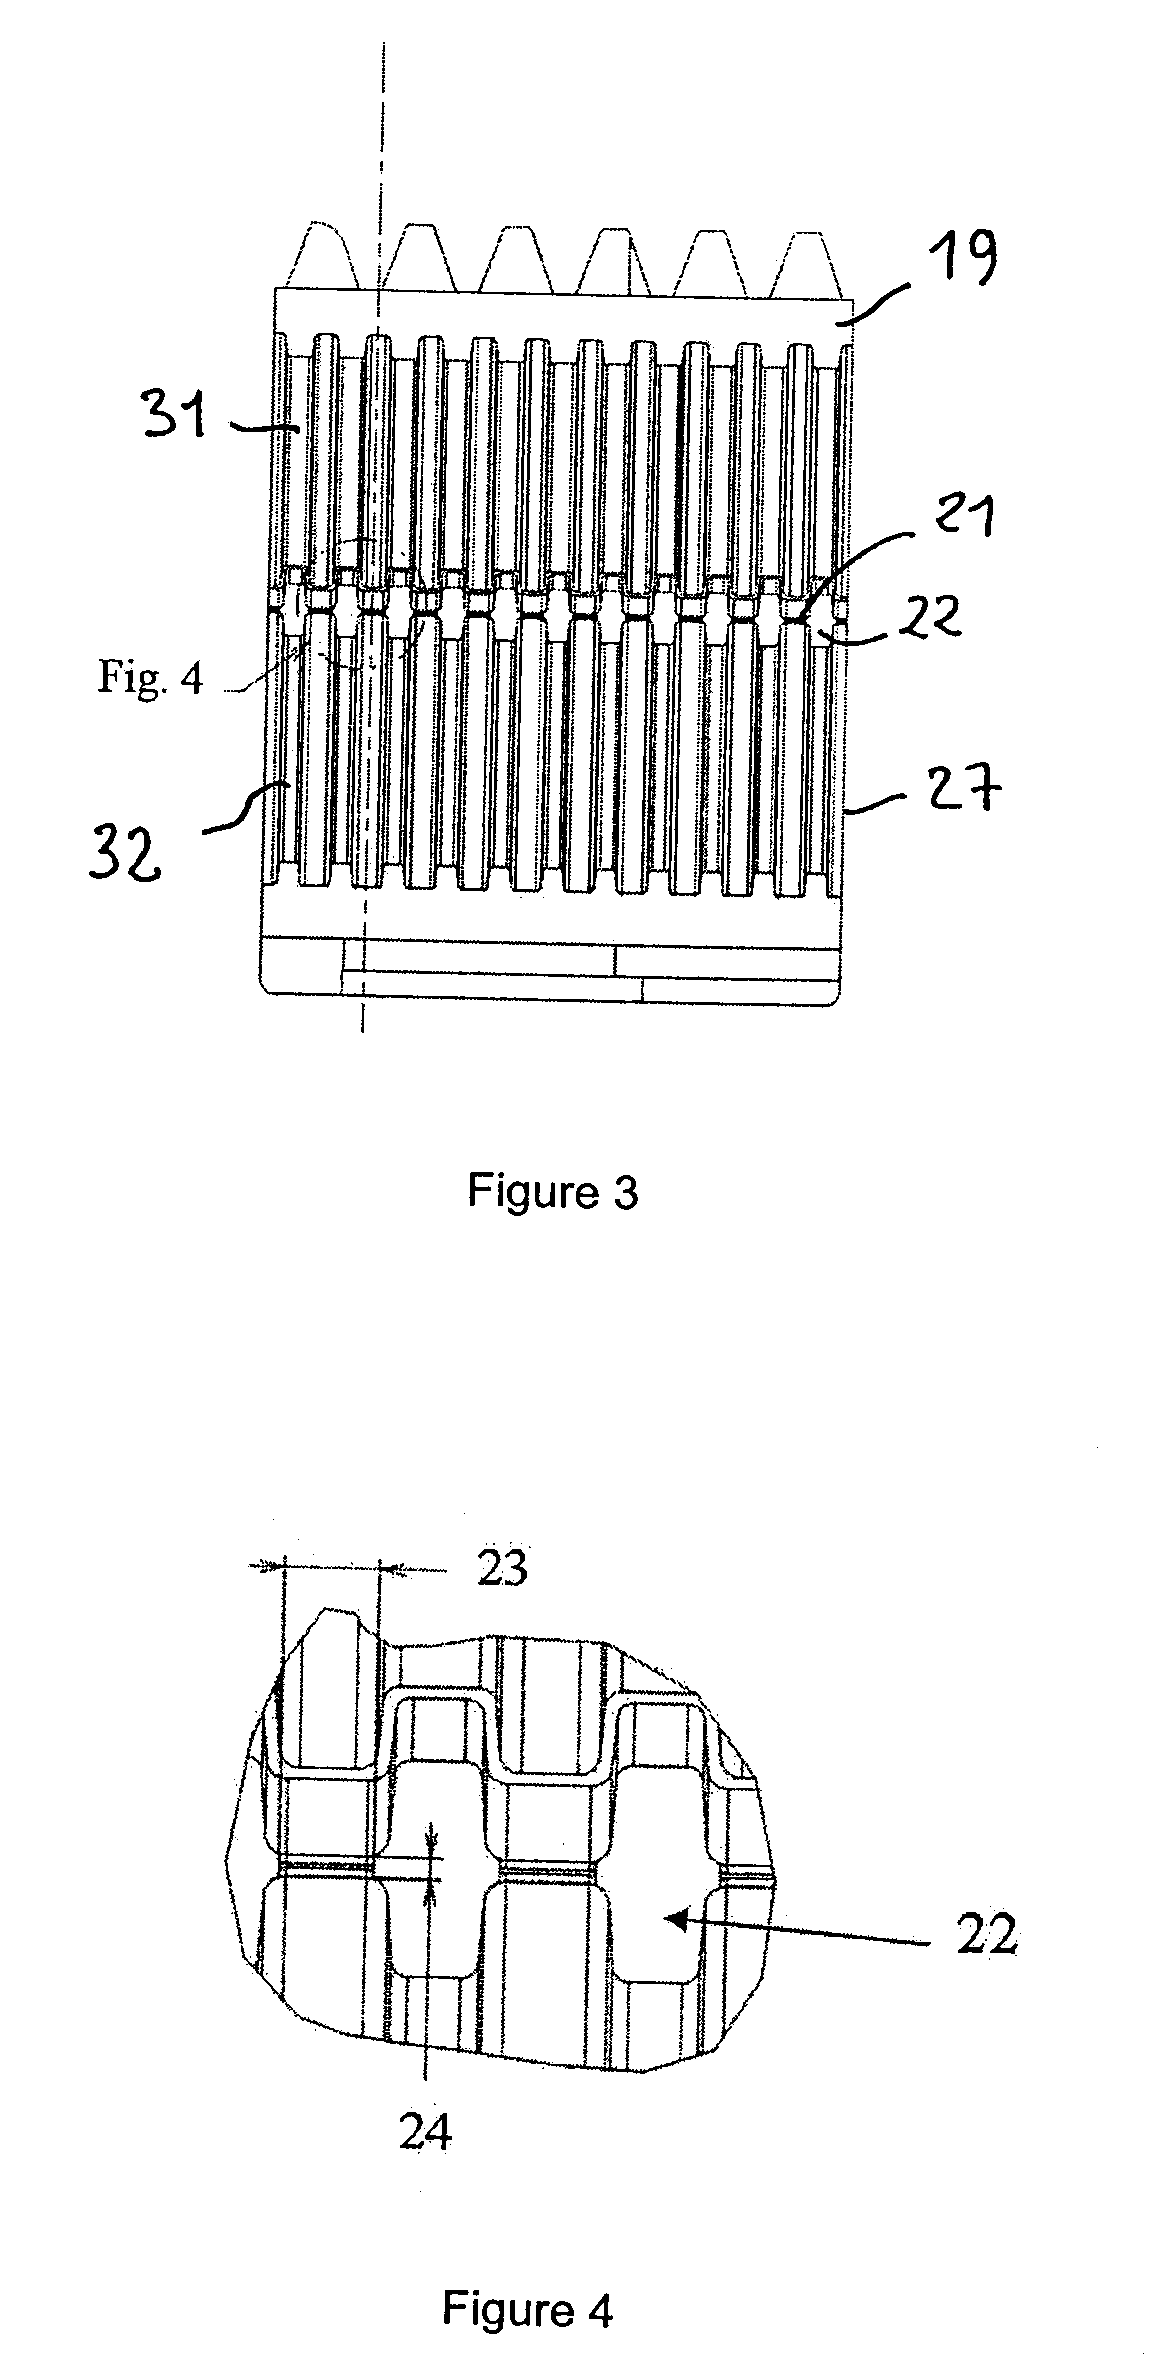 Method and Device for Manufacturing an Assembly of Two Ringed Sheaths That Can Be Detached From One Another to Make a Single Ringed Sheath